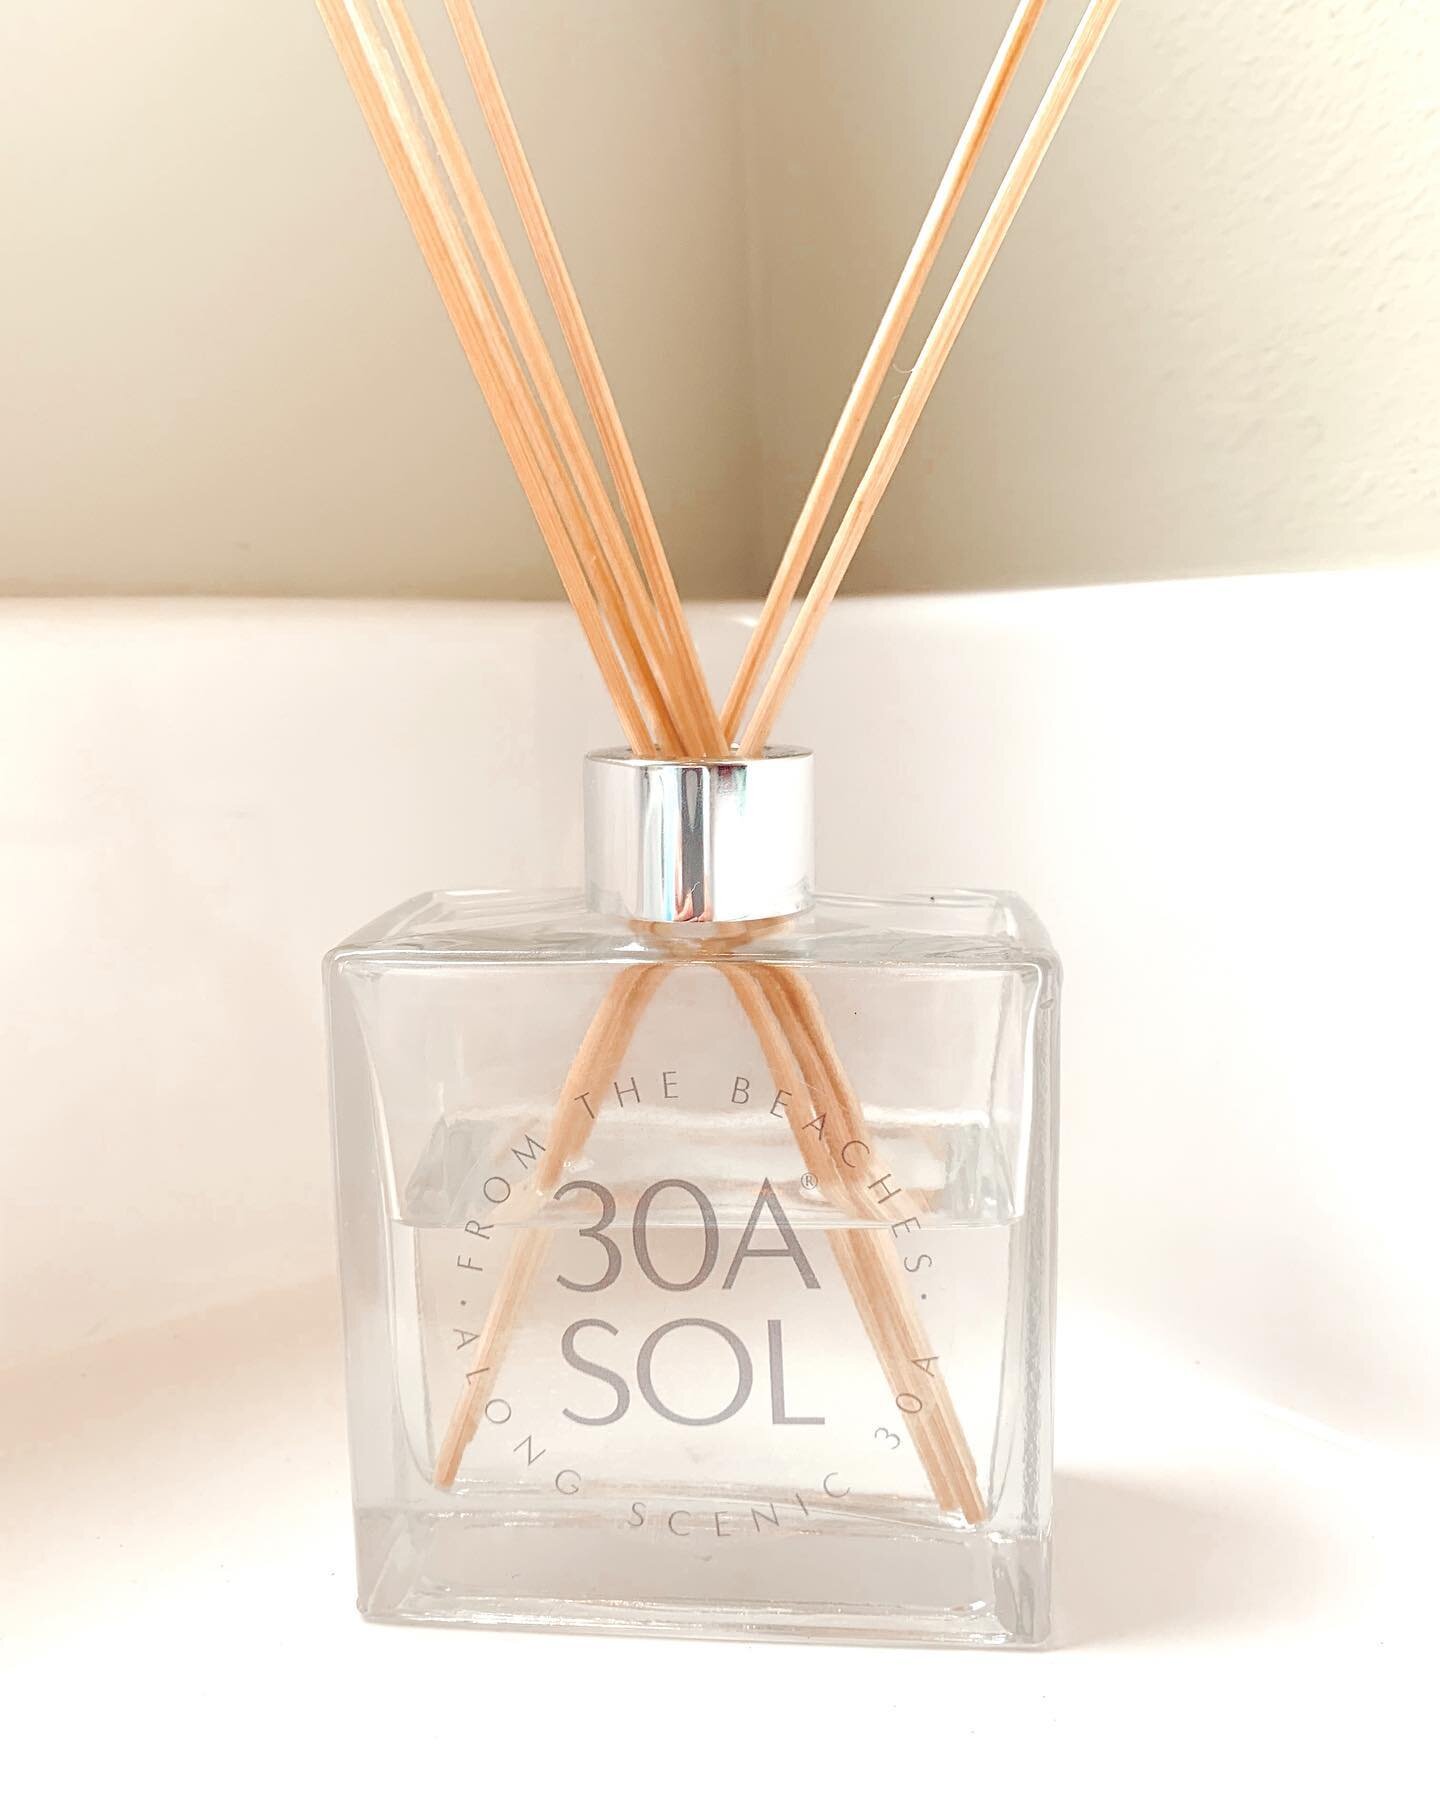 Bring the essence of the beach into any space with our new aromatic reed diffusers. ⚡️